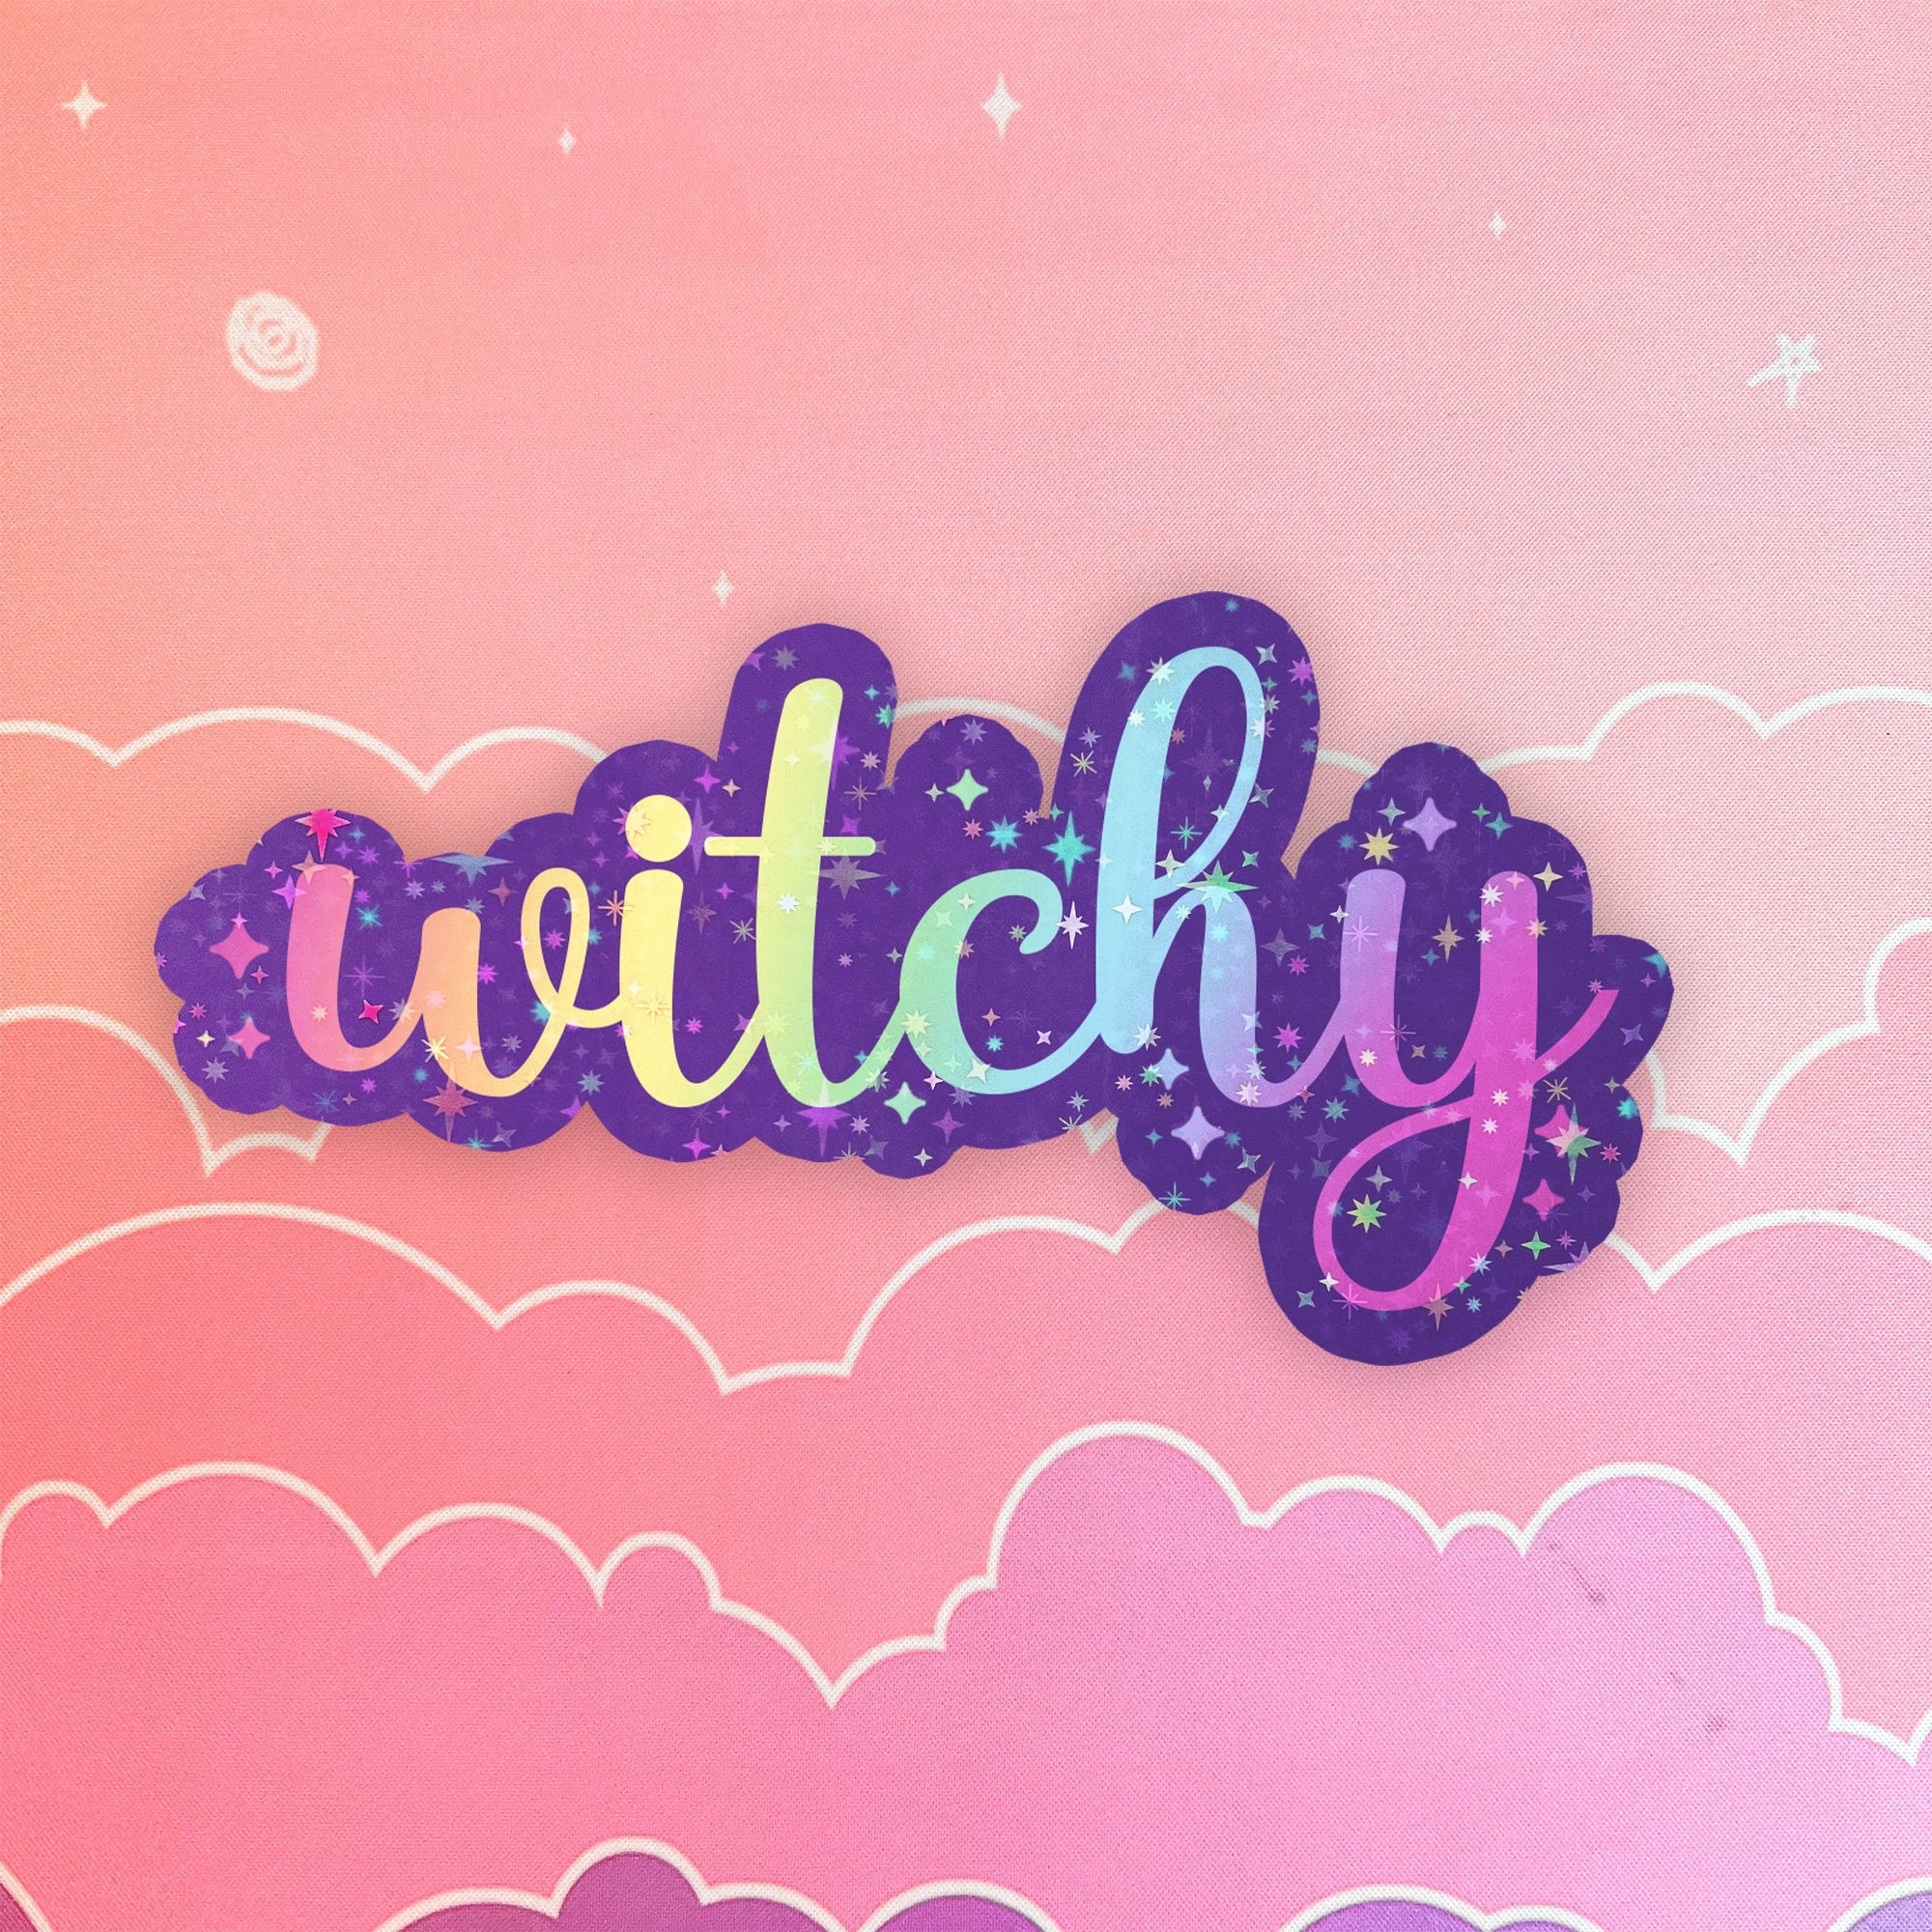 Witchy Sticker Halloween Aesthetic Laptop Sticker Purple and Rainbow Spooky Girly Stickers Cute Goth Kindle Stickers Hydroflask, Kawaii